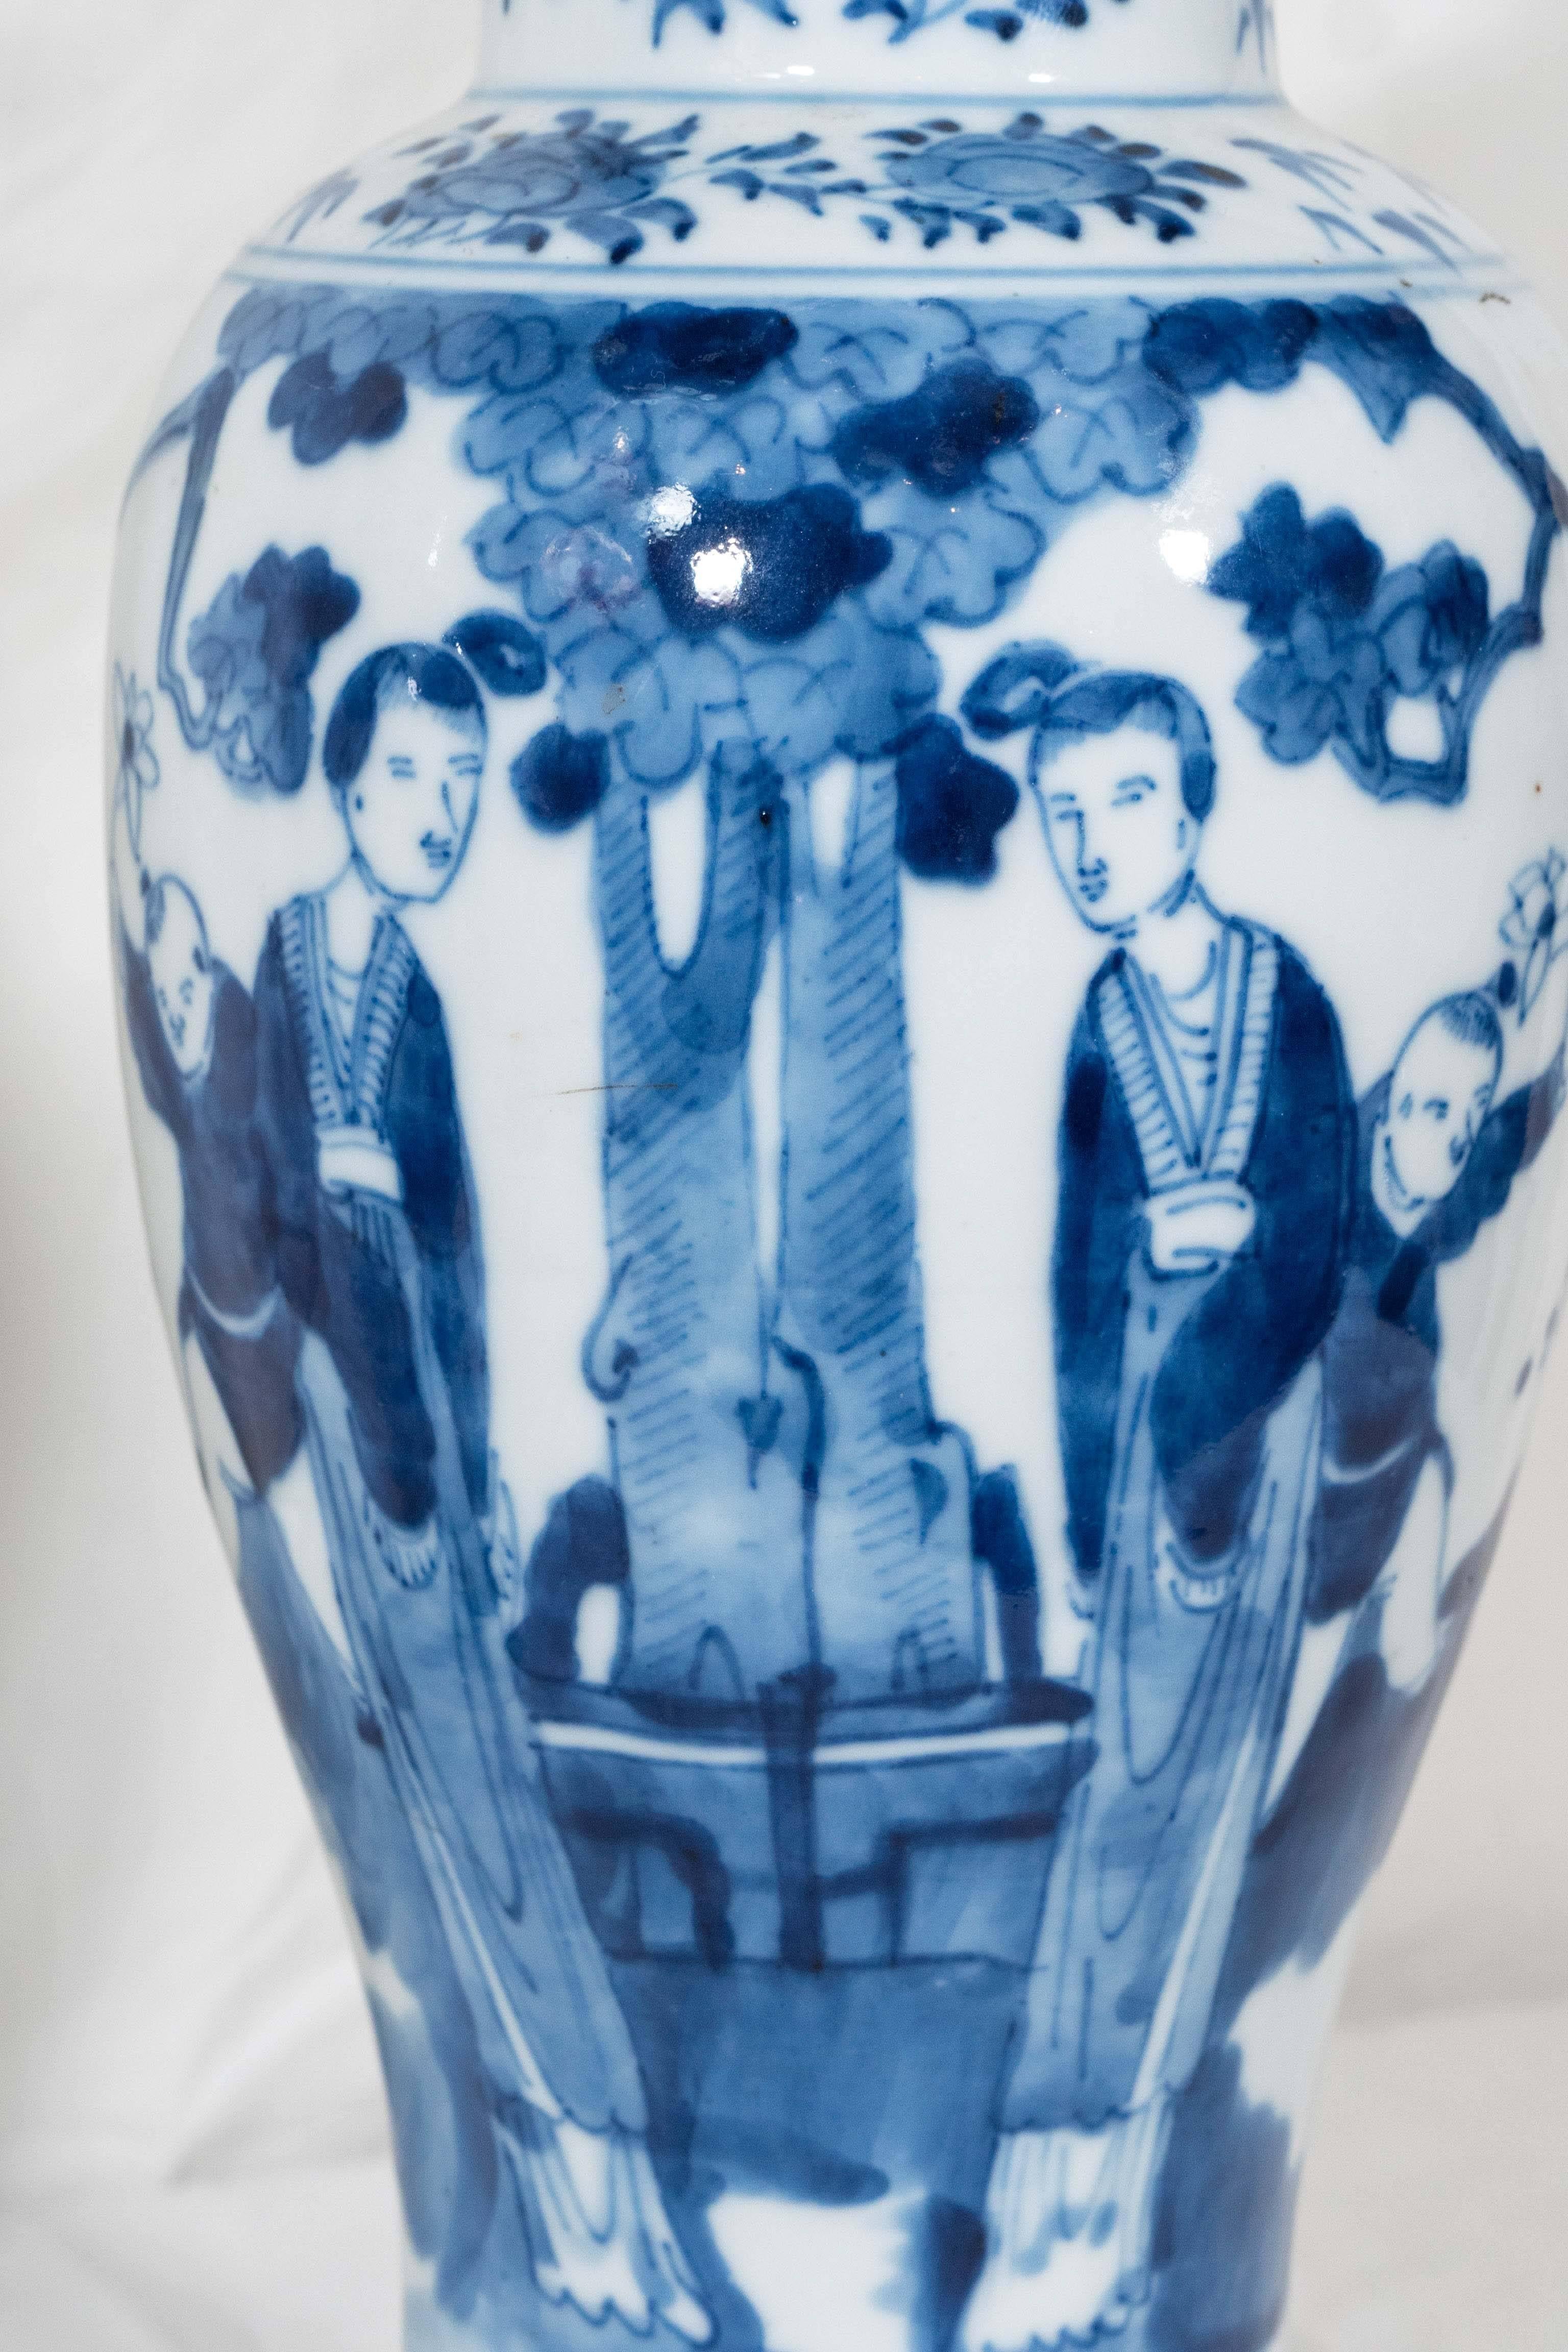 A pair of Chinese blue and white hand-painted porcelain vases decorated in underglaze cobalt blue showing a scene with a pair of Long Elizas and a young boy in a garden. Bands of flowers decorate the neck, cover, and base of each vase. The cover